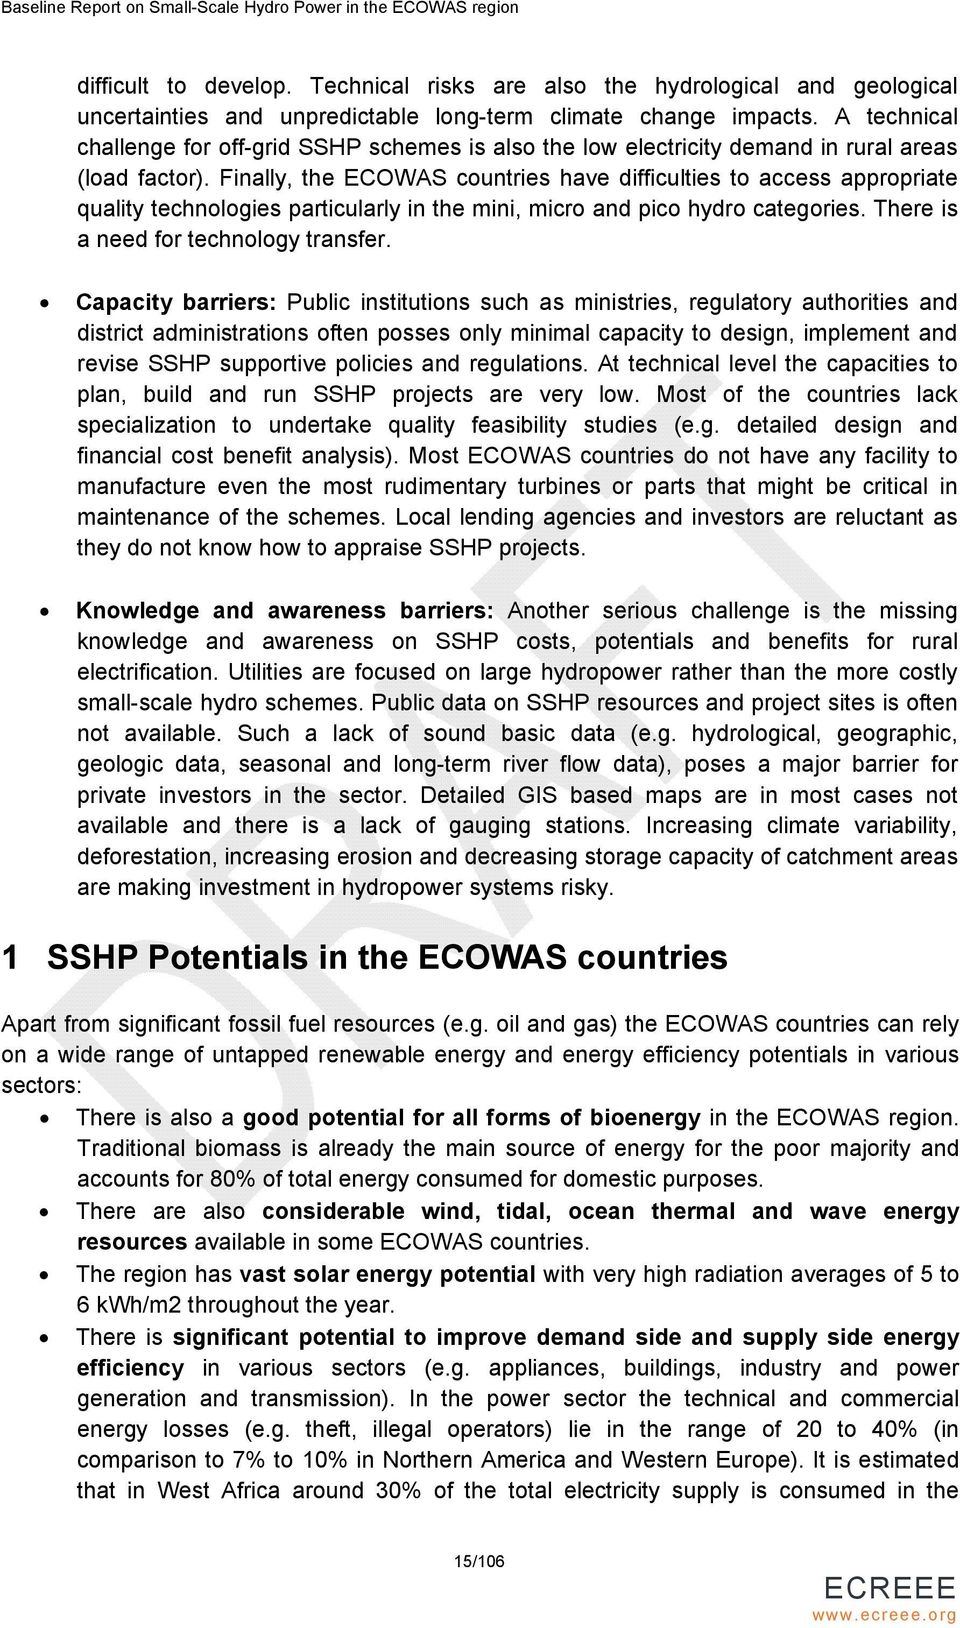 Finally, the ECOWAS countries have difficulties to access appropriate quality technologies particularly in the mini, micro and pico hydro categories. There is a need for technology transfer.